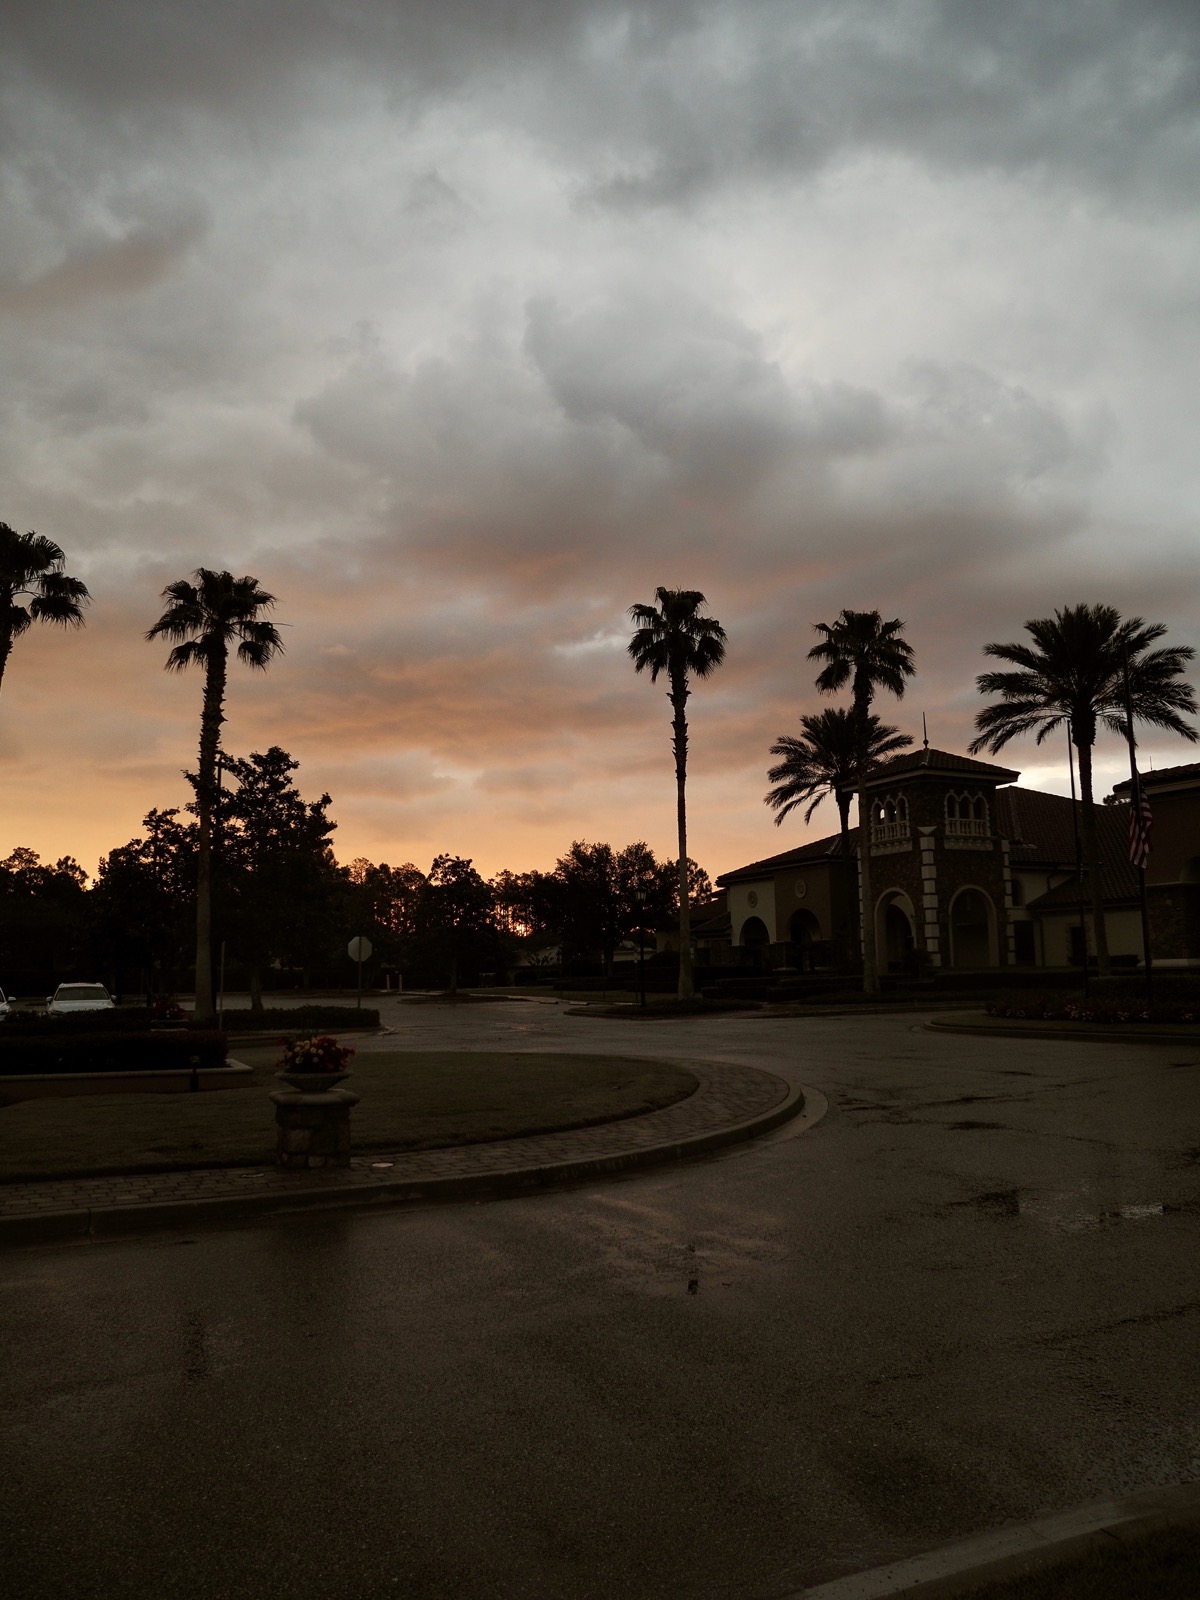 Early morning clouds and a wet road with palm trees silhouetted